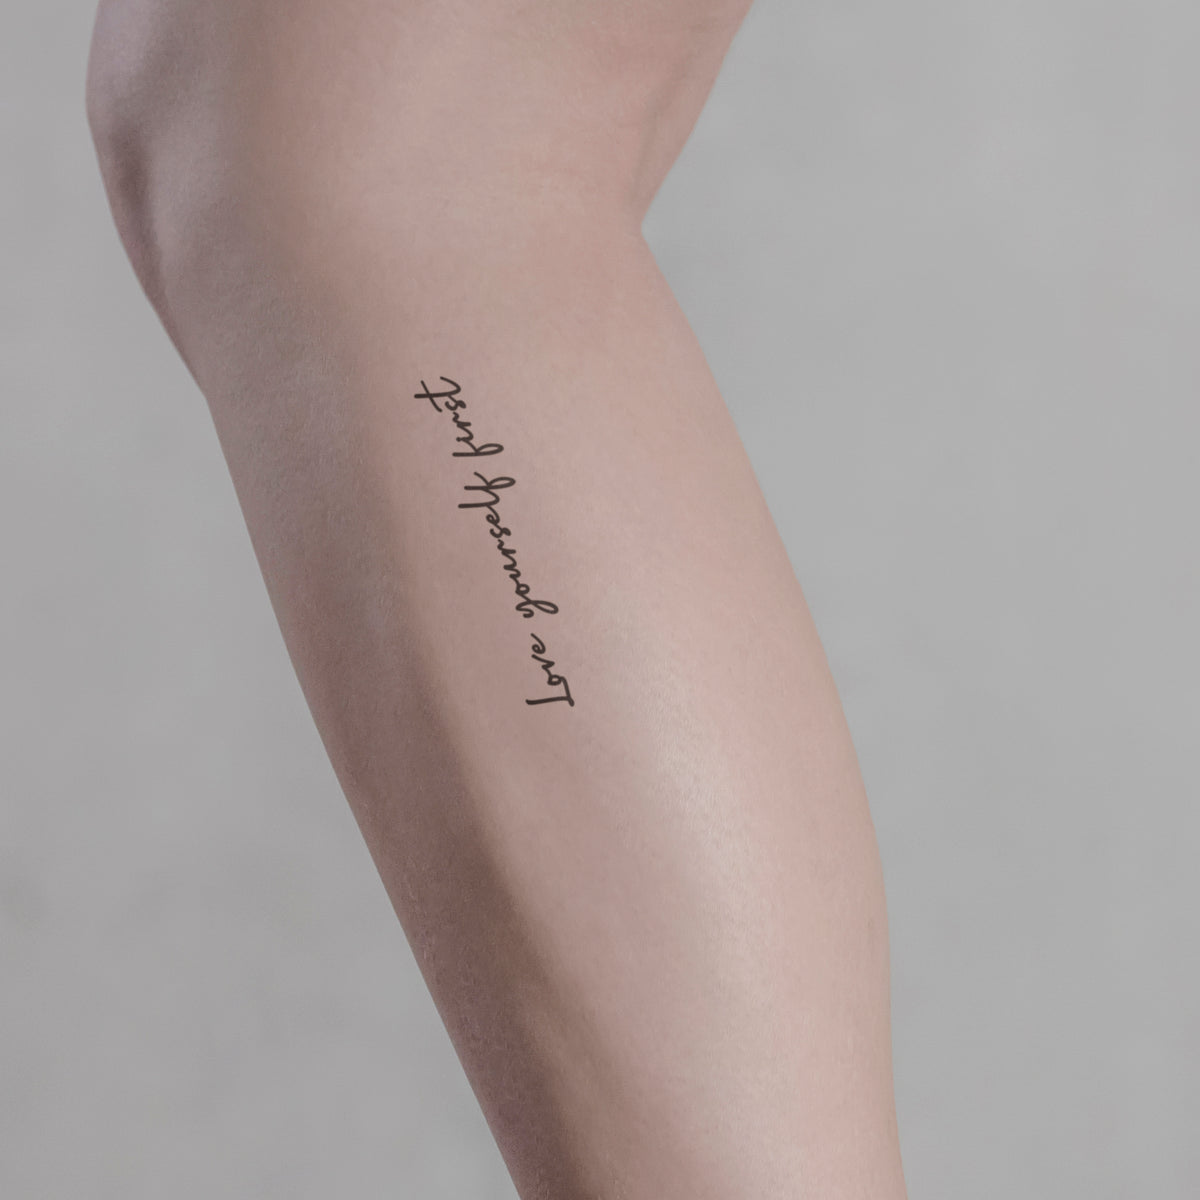 Amazon.com : 5 x Don't forget to love yourself - temporary Skin Tattoo -  Lettering in black (5) : Beauty & Personal Care